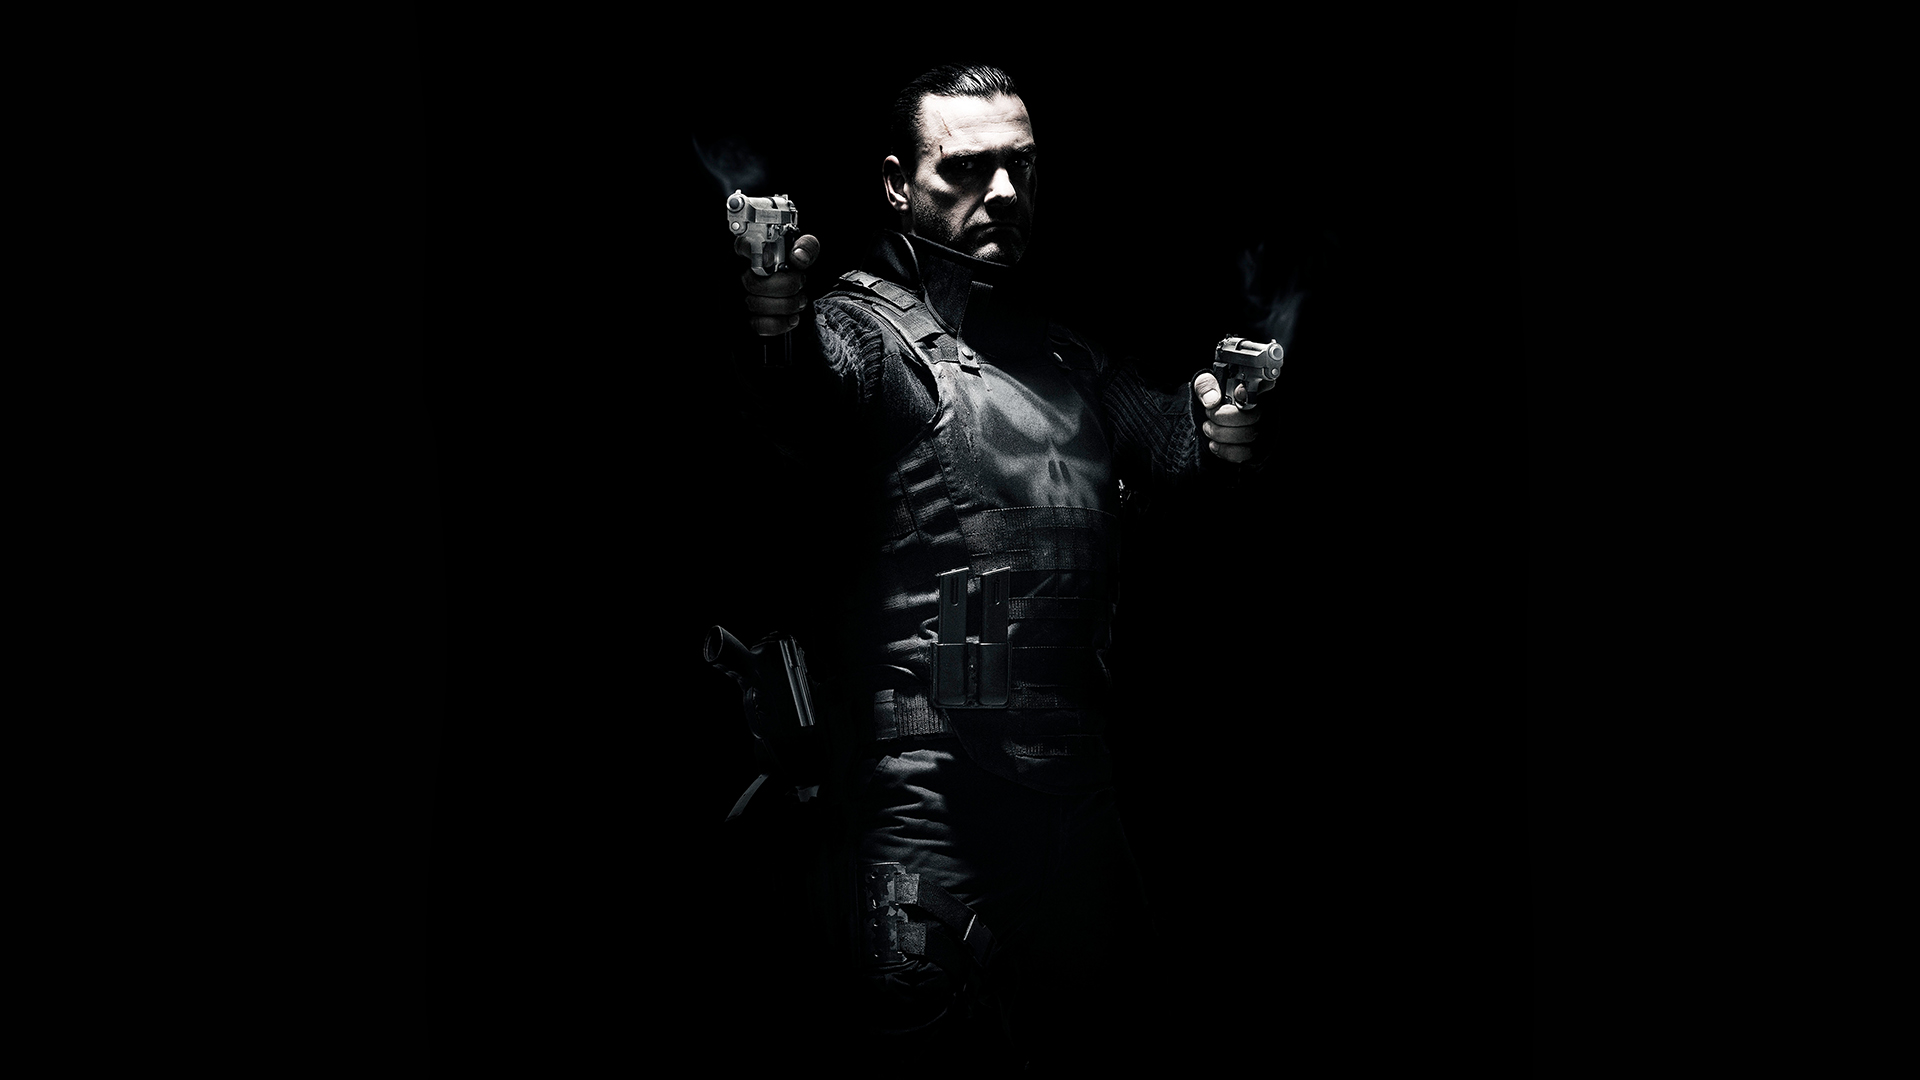 Related Pictures punisher iphone wallpaper idesign iphone 1920x1080